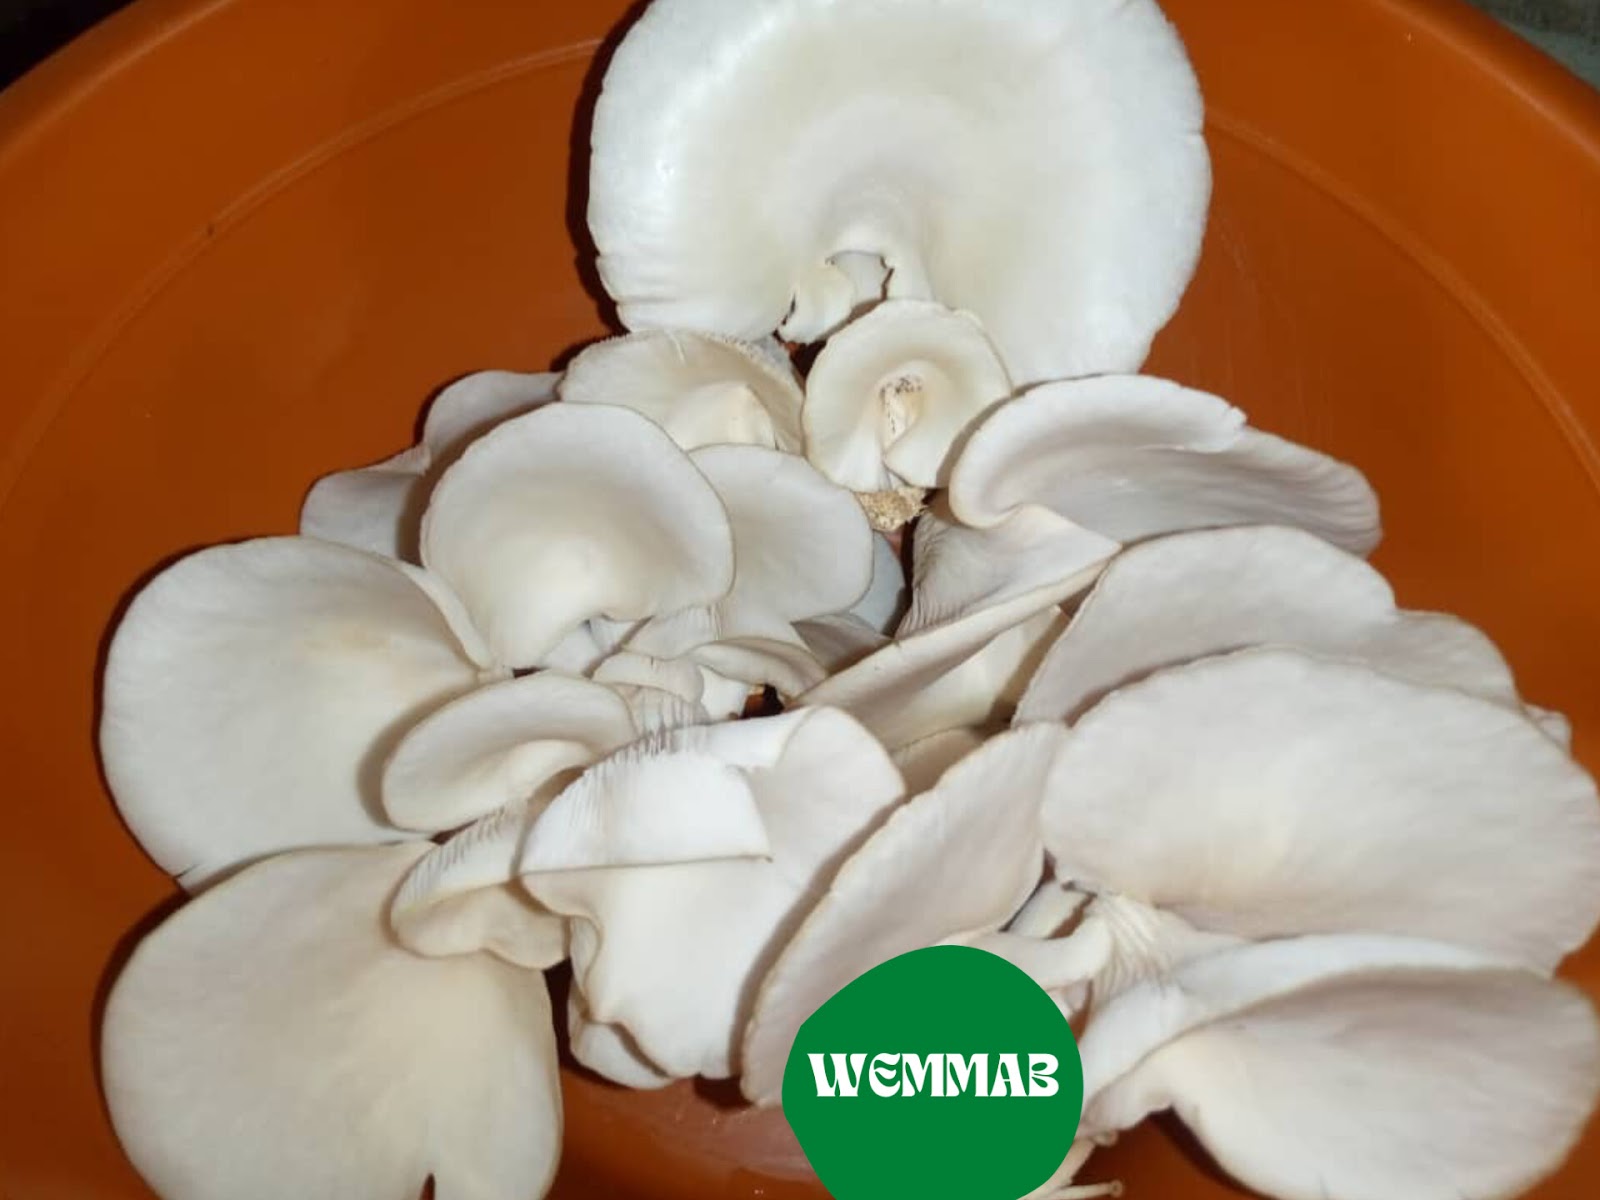 How to grow oyster mushrooms using sawdust